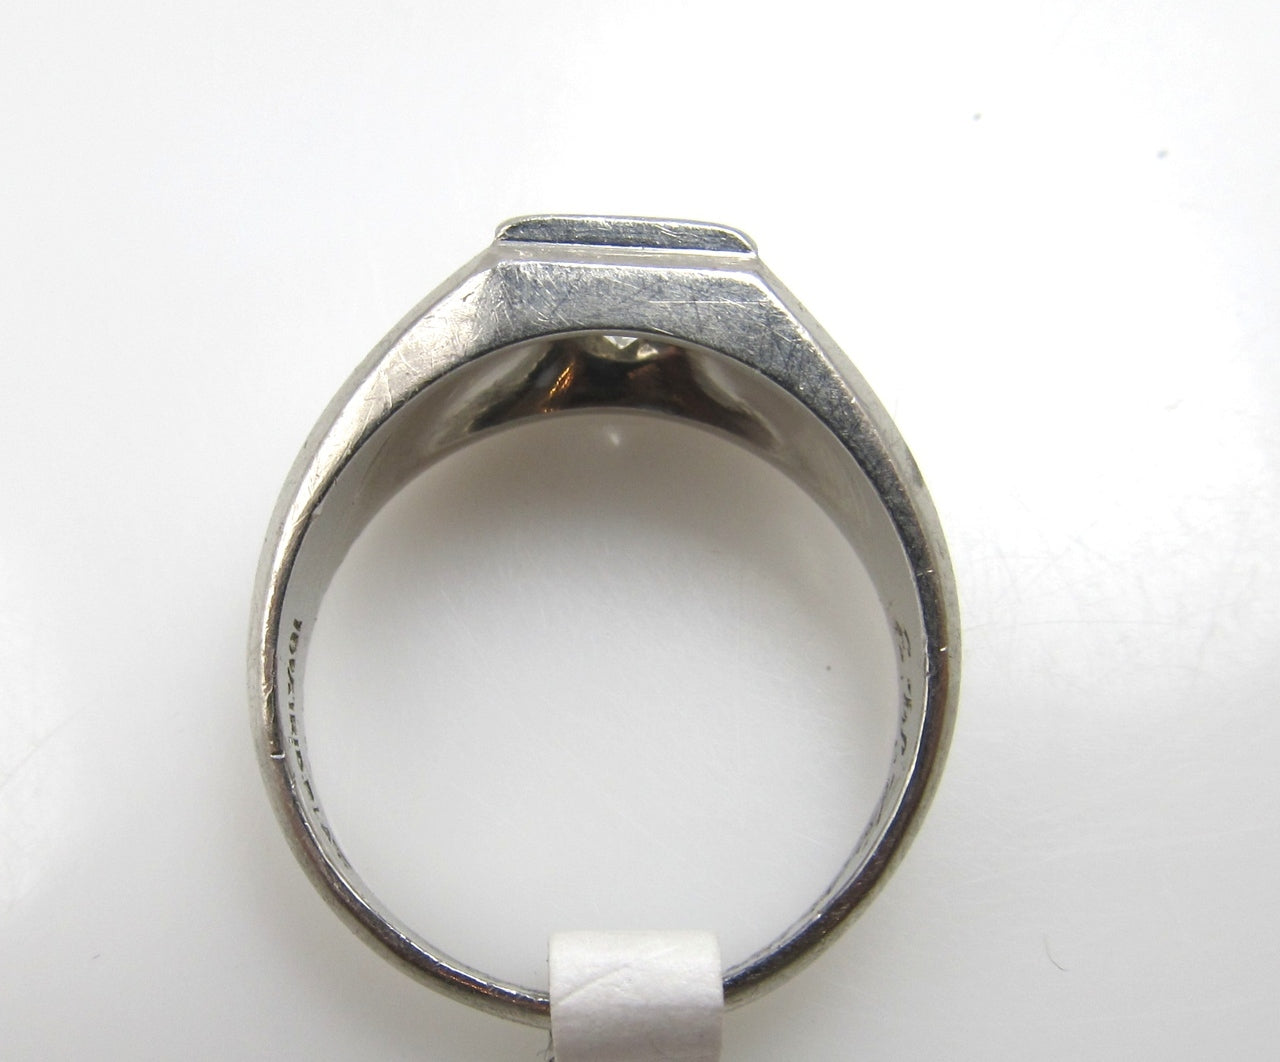 Platinum ring with a .80ct diamond, ring is dated 1933